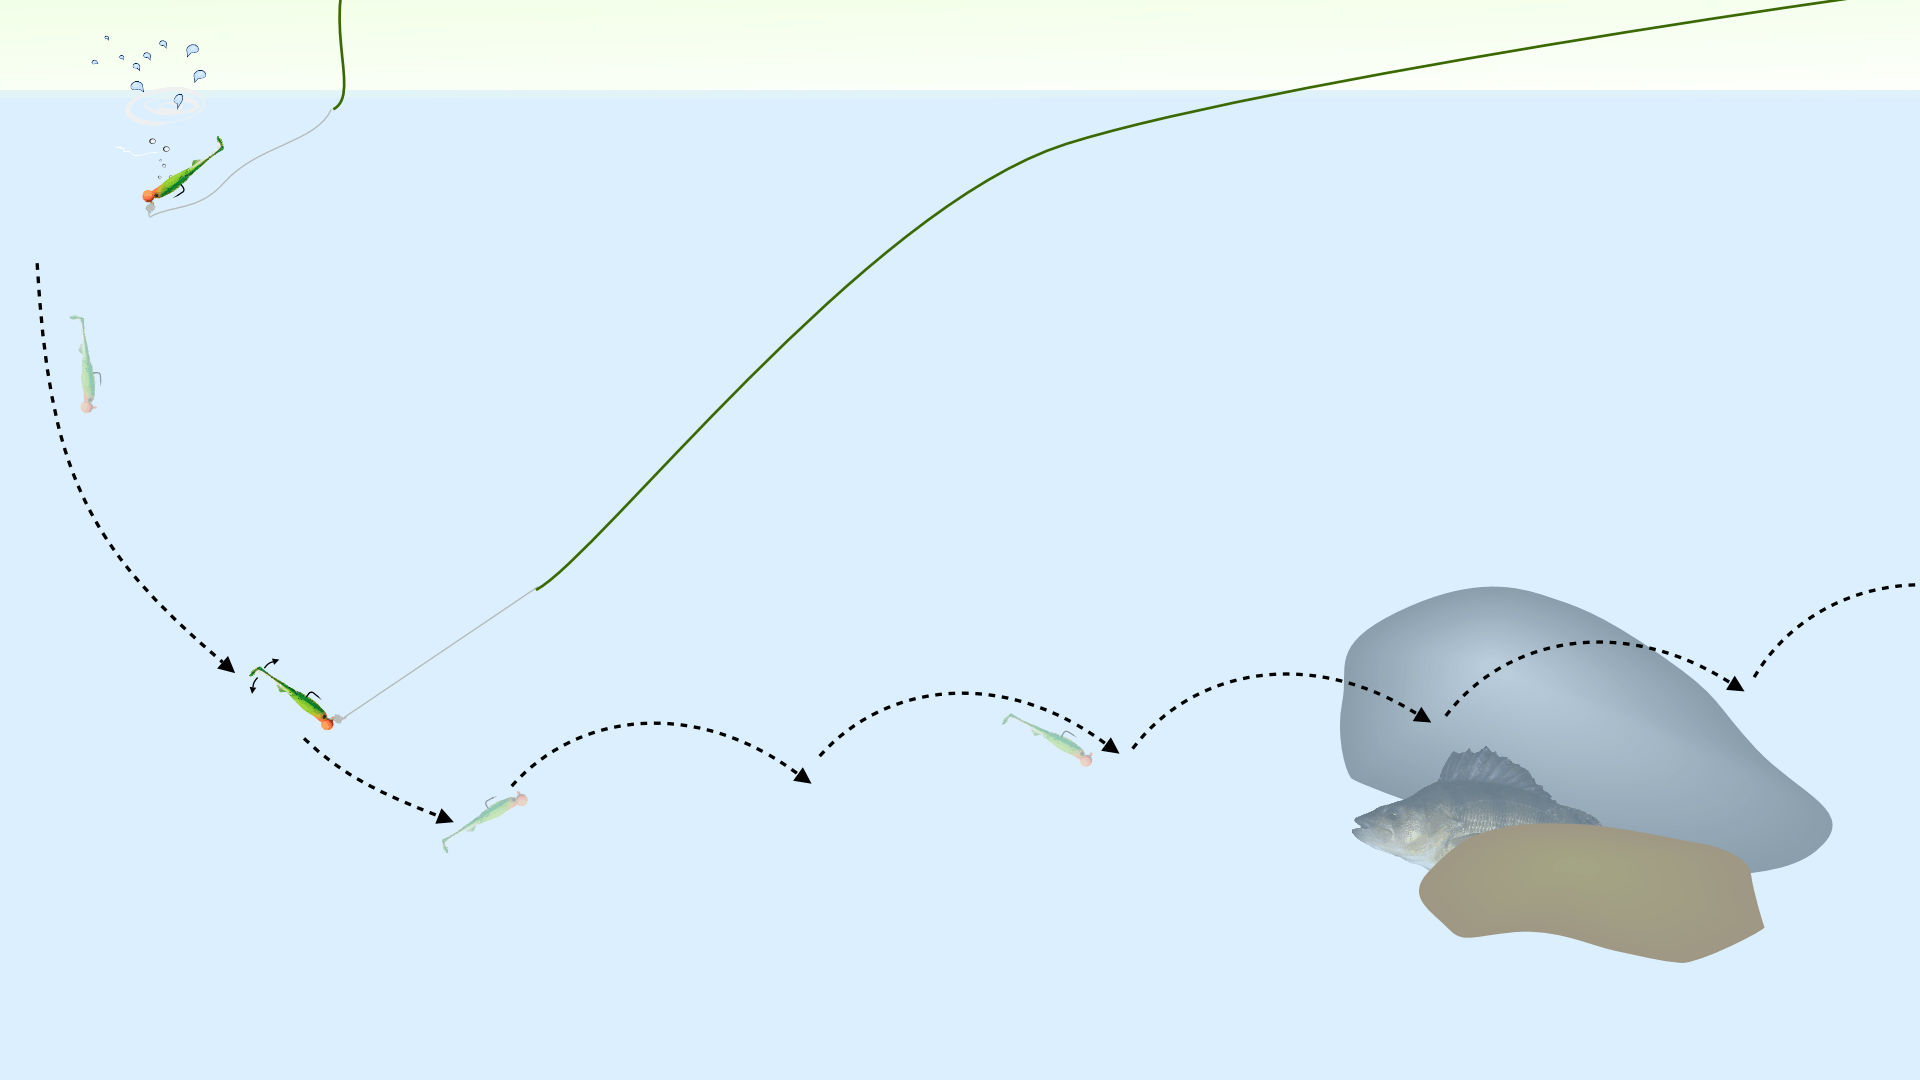 Sink and Draw path of Perch jig